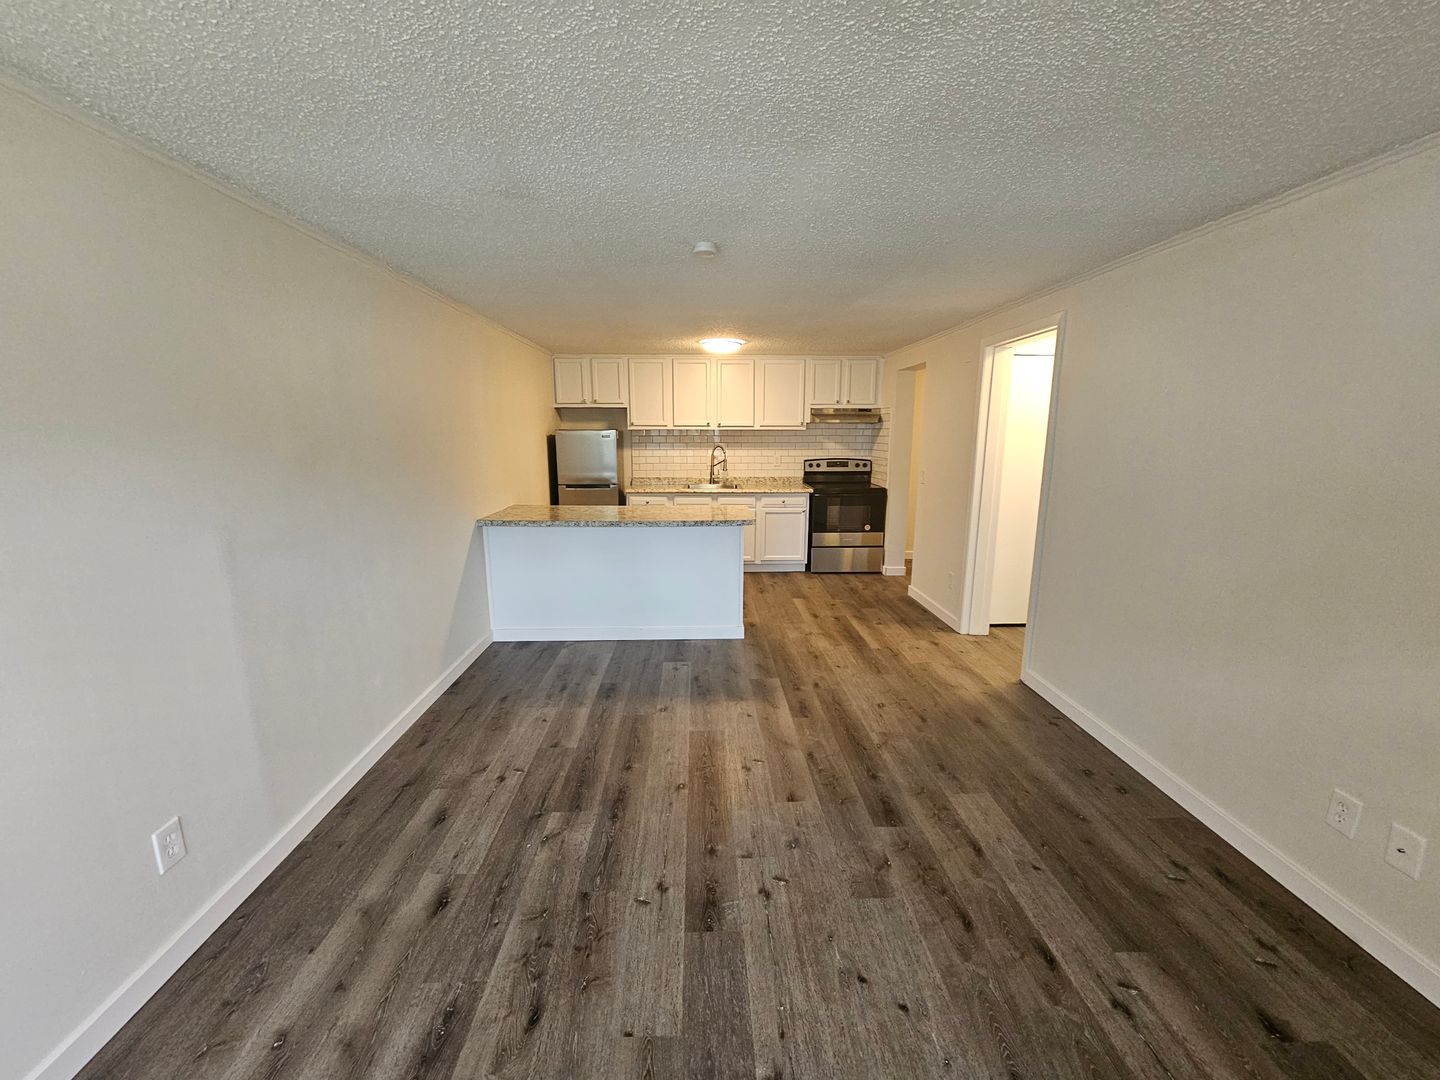 1 Bed and 1 Bath Apartments with In-Unit Laundry for Rent | Entirely Renovated Image